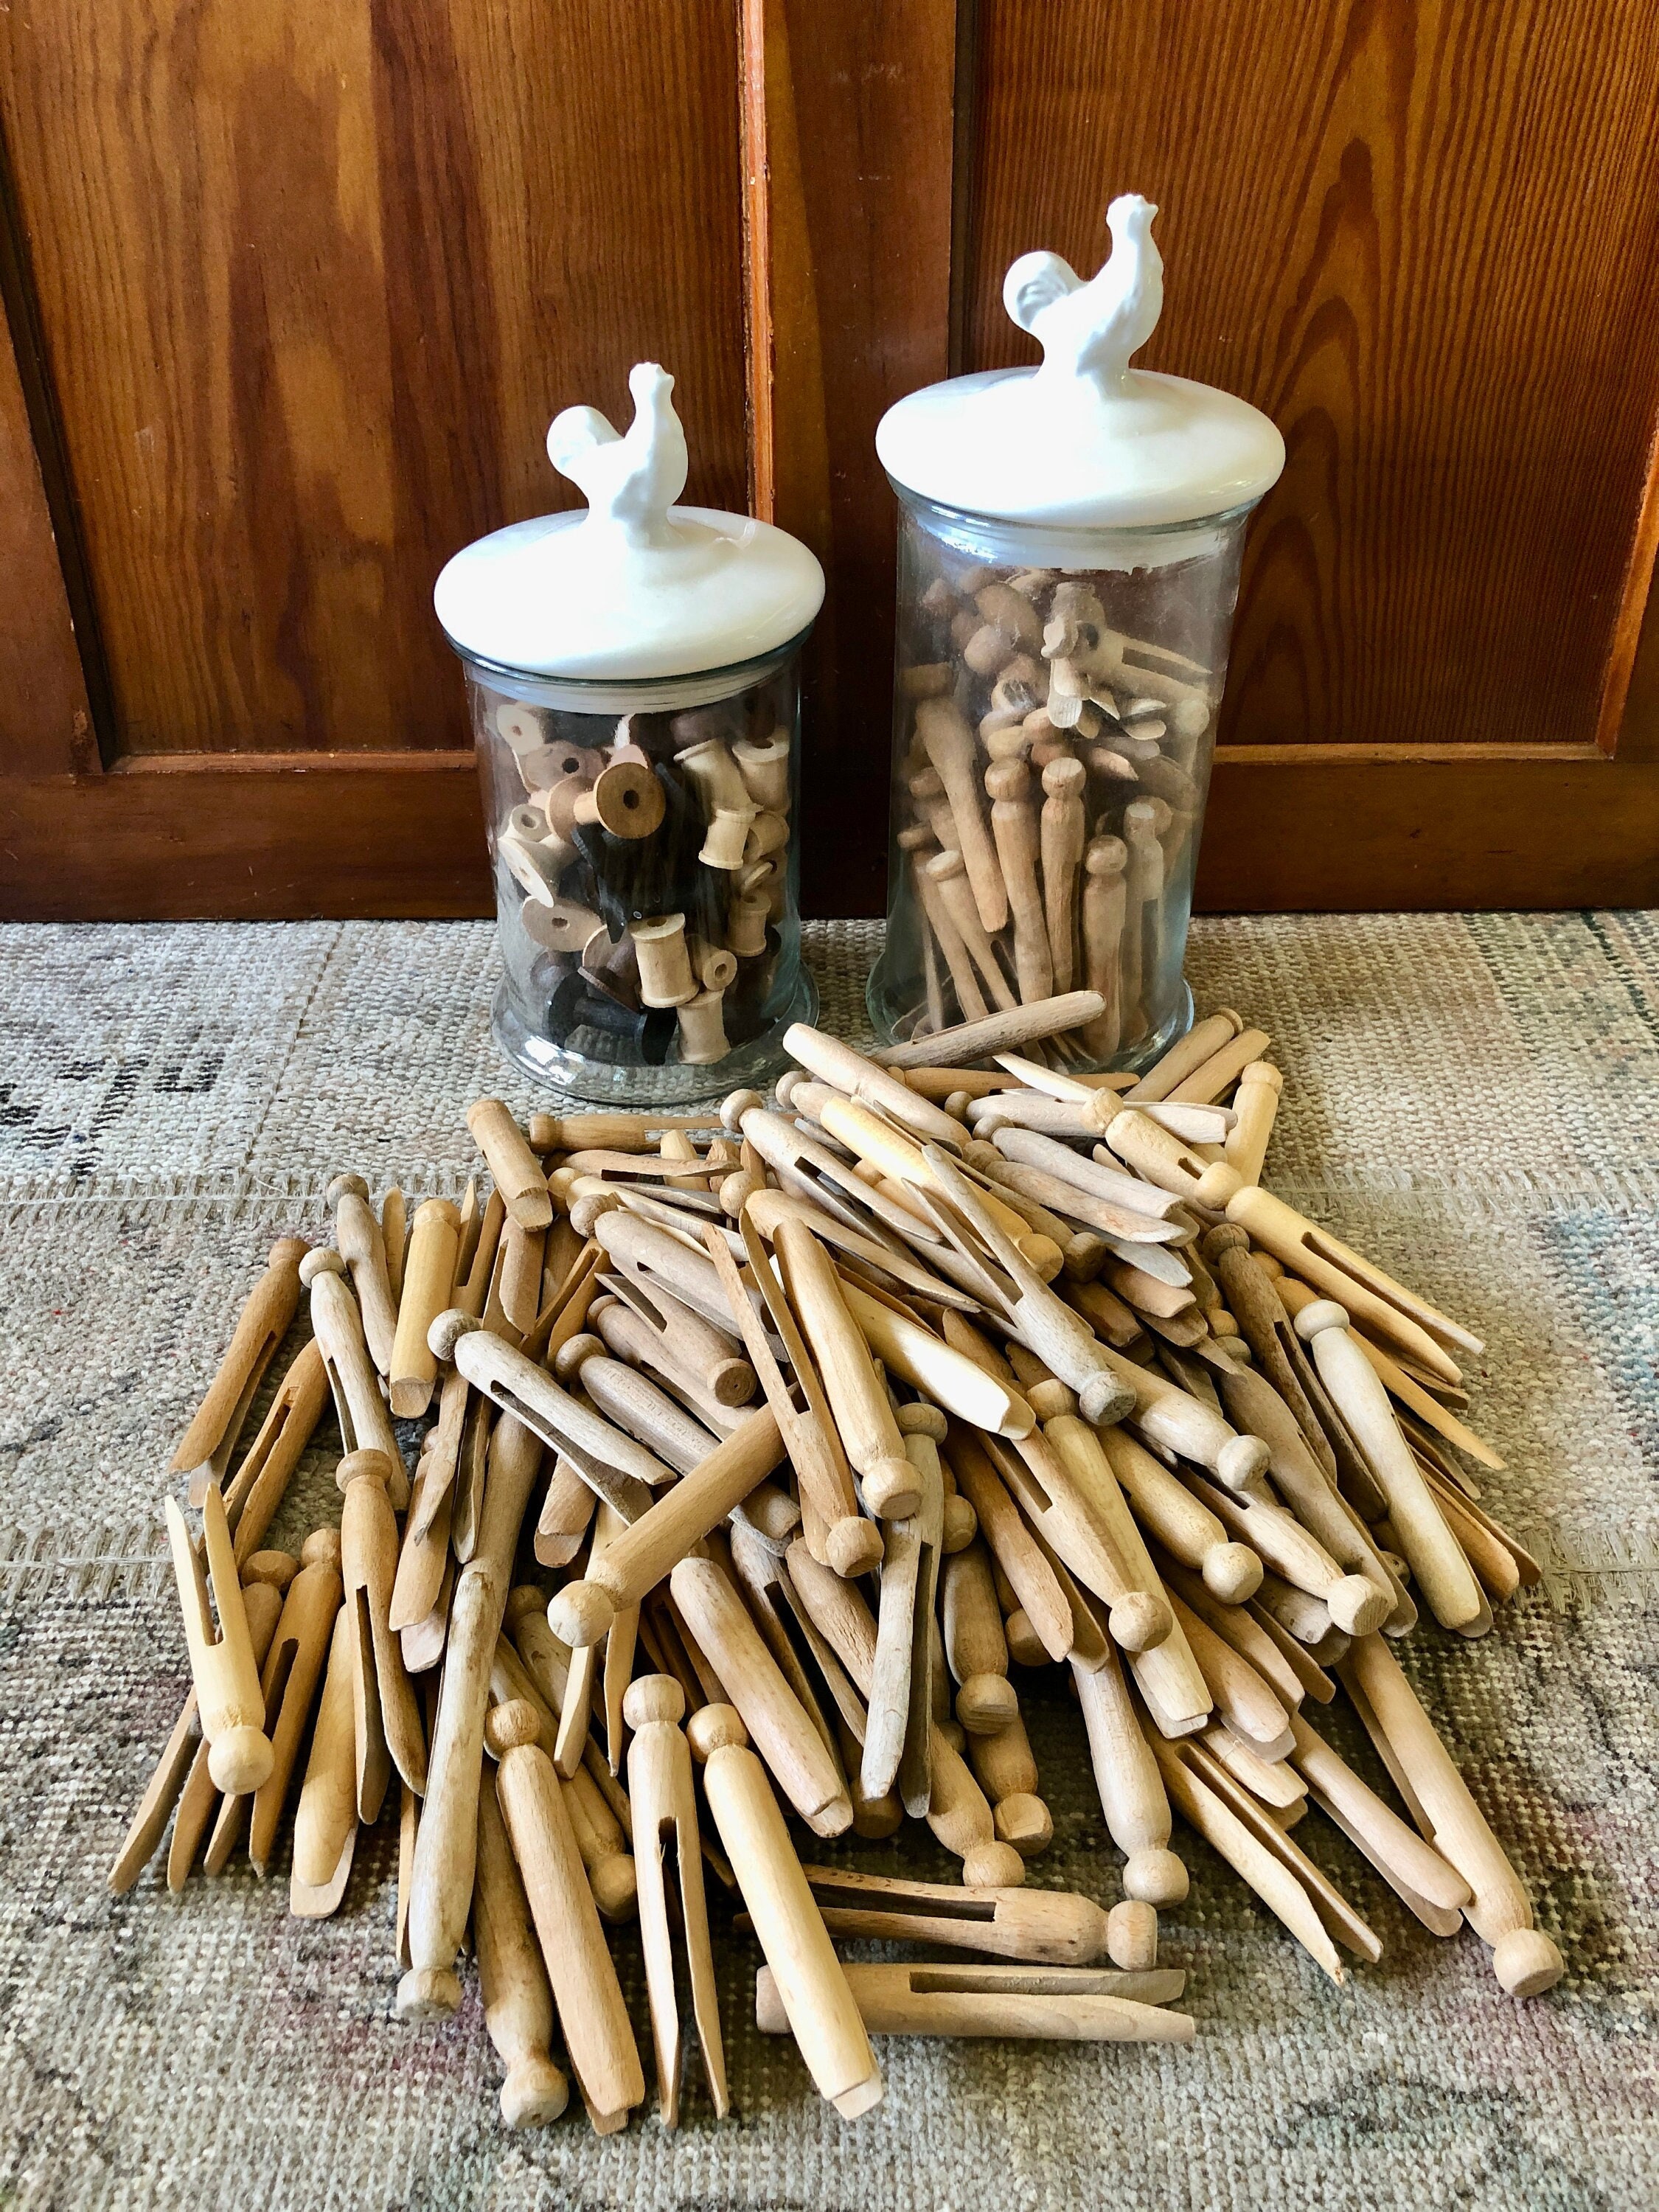 Vintage Lot of 37 Wooden Clothes Pins Rounded w/ Orange Paint